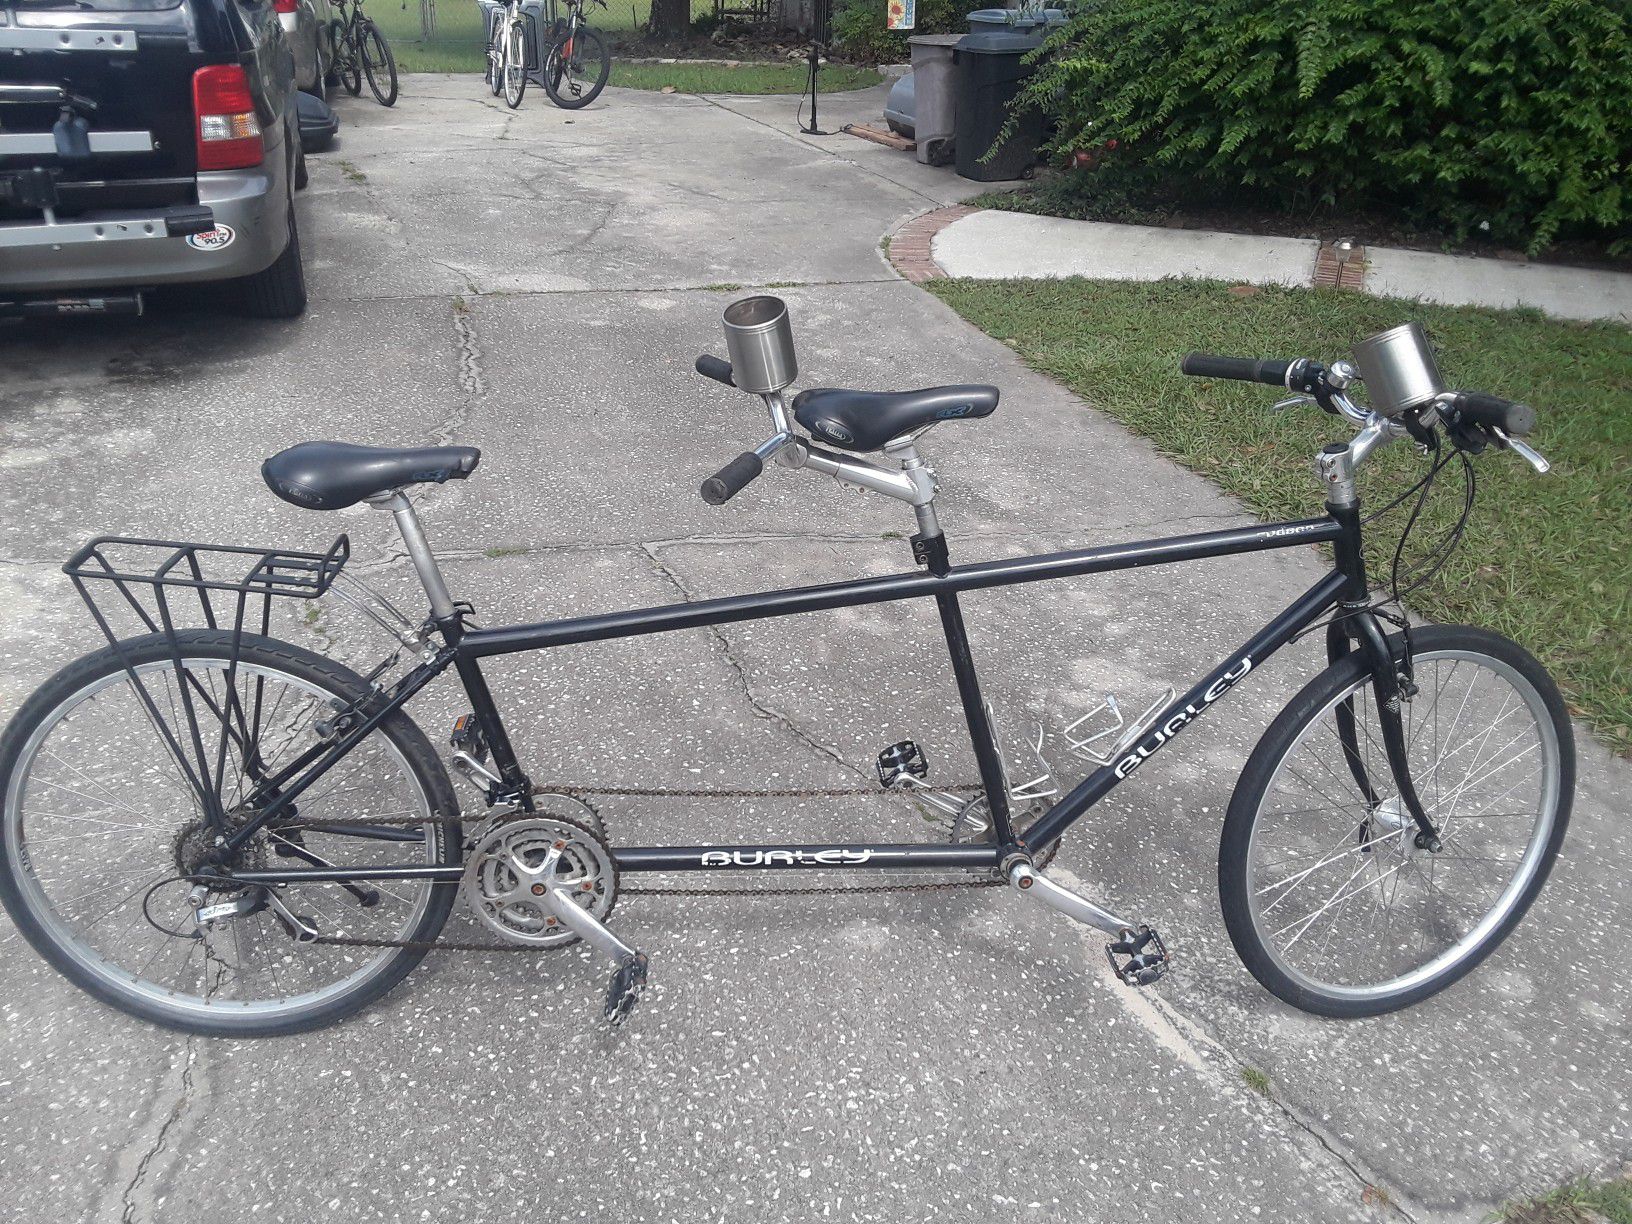 Burley Zydeco Tandem 24 speed bike, 21" and 16" frame sizes respectively, 26" hybrid tires.